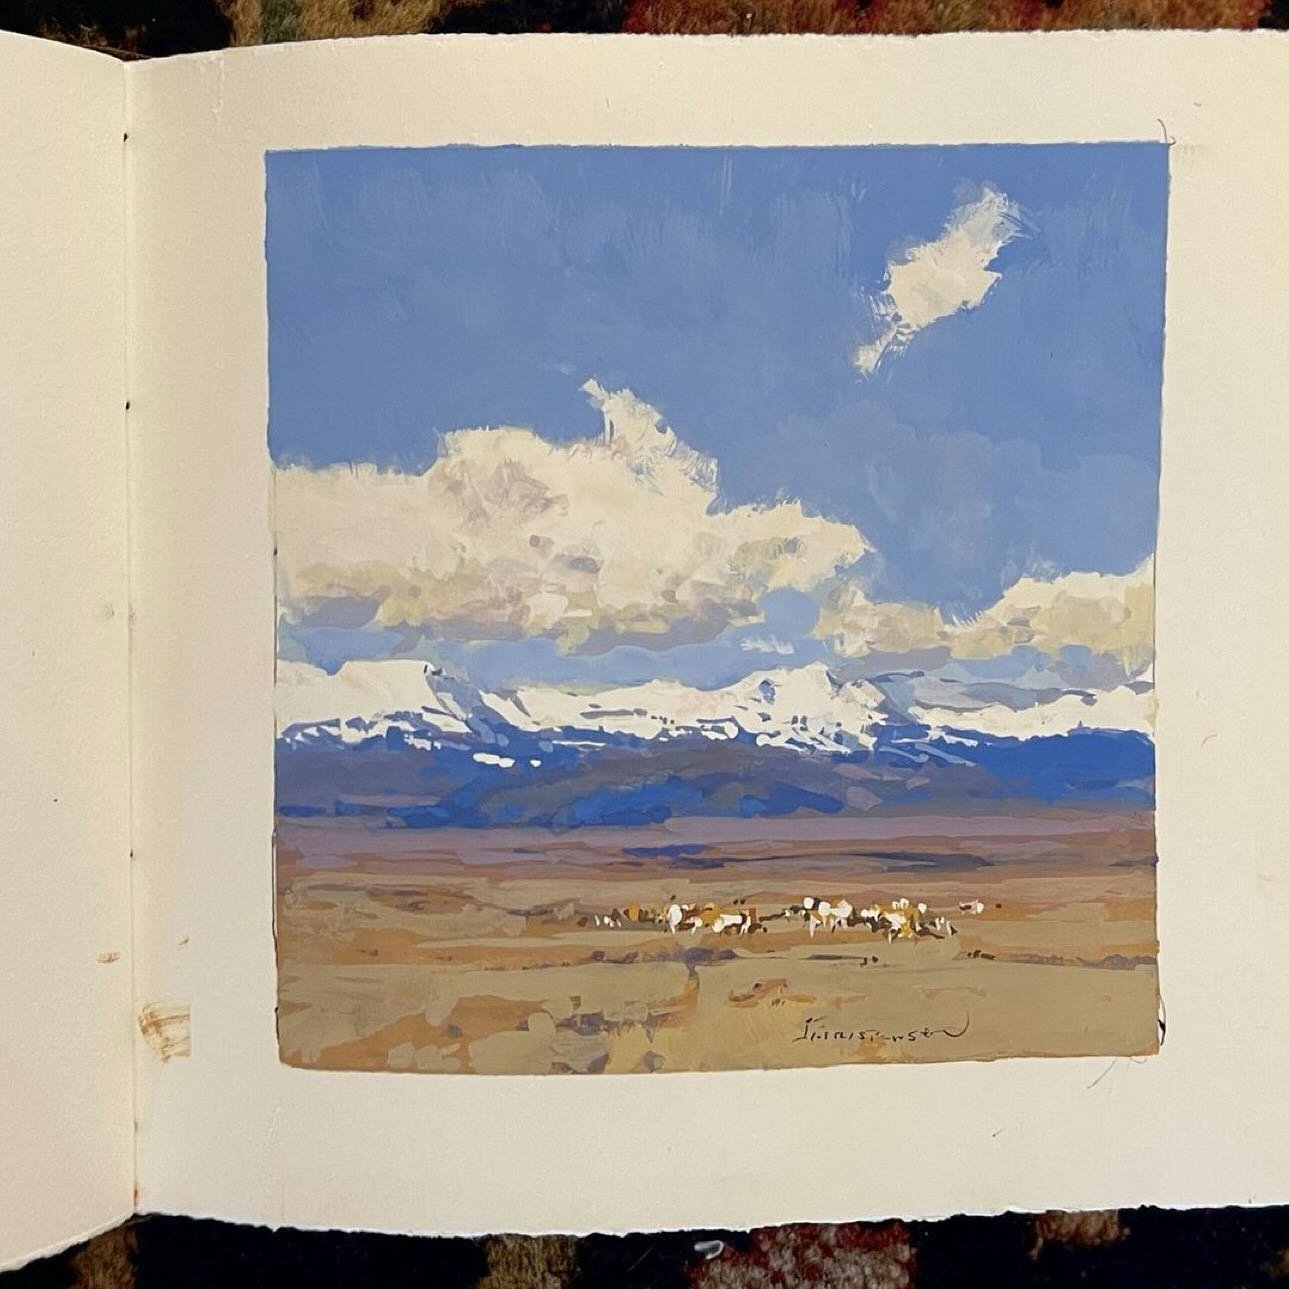 &ldquo;Sweetwater study&rdquo; color of Wyoming in April..
 
What ideas are you working on this week?

 
 
 
 
#adventureofpainting #paintingstudy #wyomingpainting #scottchristensenartist